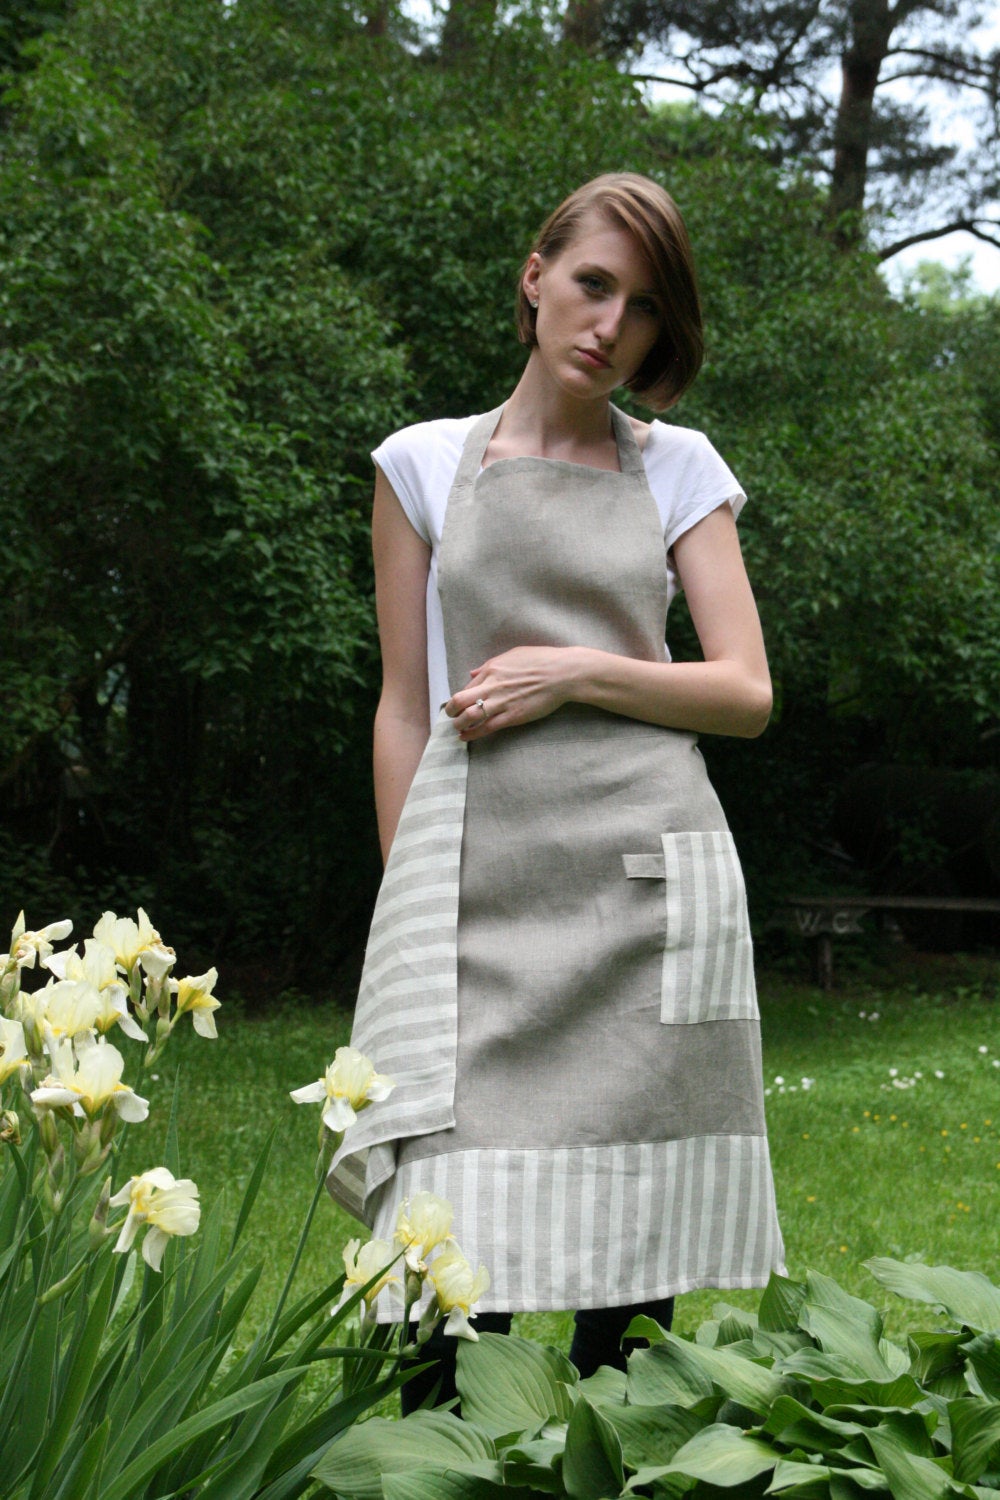 Linen Full Apron & Kitchen Towel/ Natural and Striped Combination